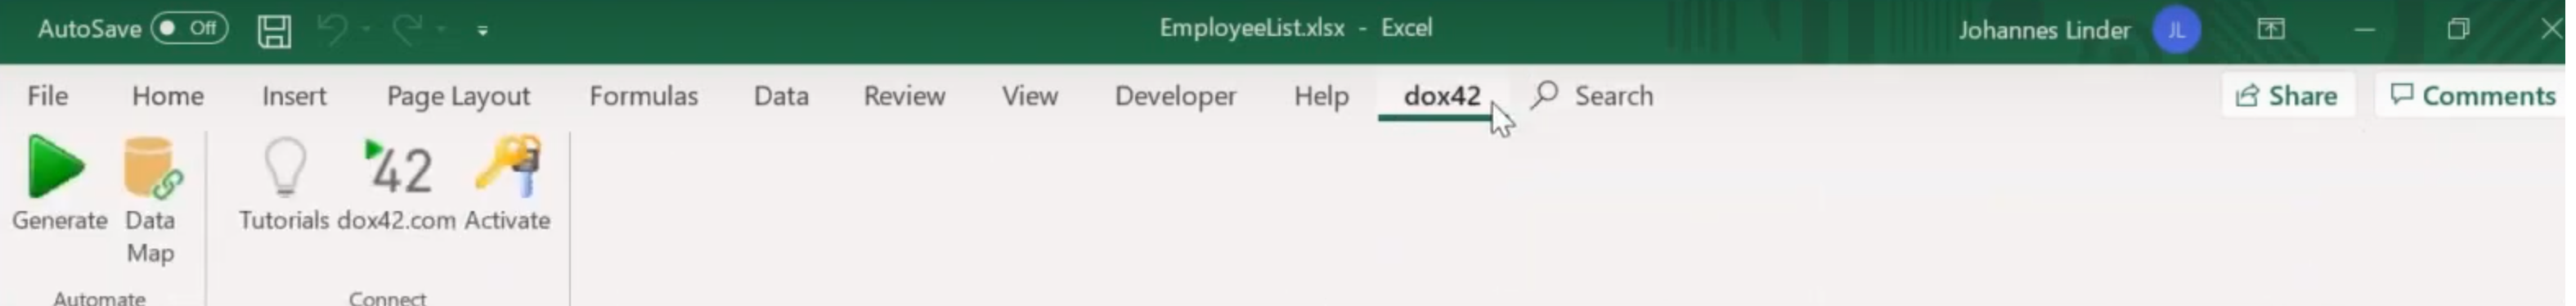 Screenshot of Dox42 document automation Excel addin